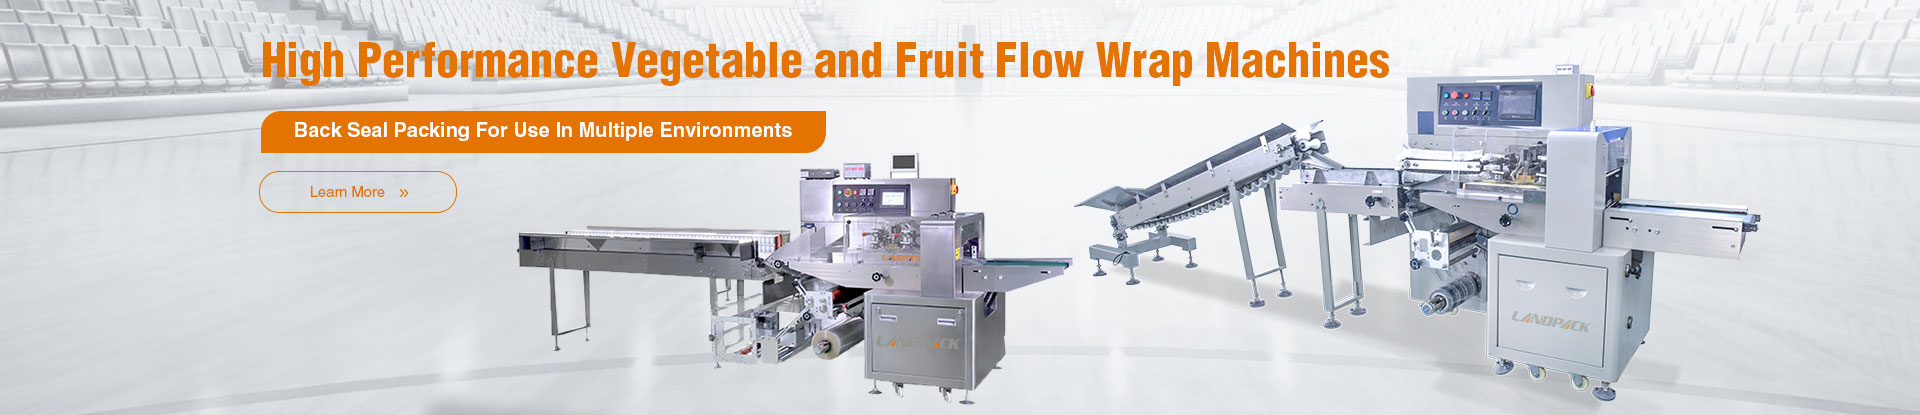 Automatic Feeding & Packaging Line